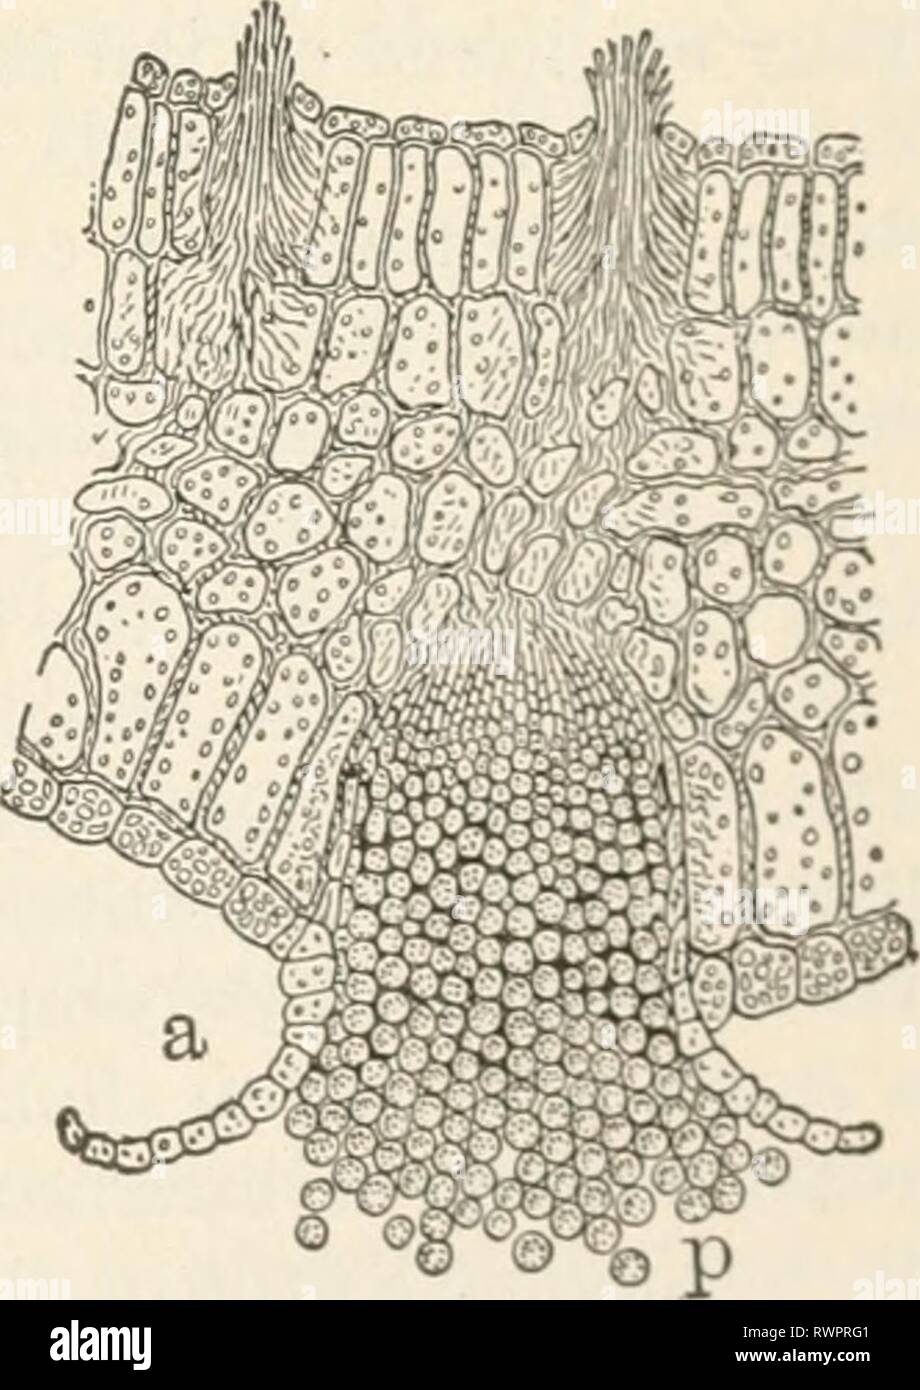 Elements of biology; a practical Elements of biology; a practical text-book correlating botany, zoology, and human physiology elementsofbiolog00hunt Year: [c1907]  Uredospores and a teleuto- spore (/) of wheat rust.— De Bary, spots are caused by collections of spores of the rust. The mycelium of the plant is within the blade of the leaf, where it takes its food supply from the living cells of the green leaf. The mycelium sends up stalks through the stomata of the leaf ; it is these that hold the sporangia, filled with myriads of yellow-brown spores. The spores produced in the summer time are t Stock Photo